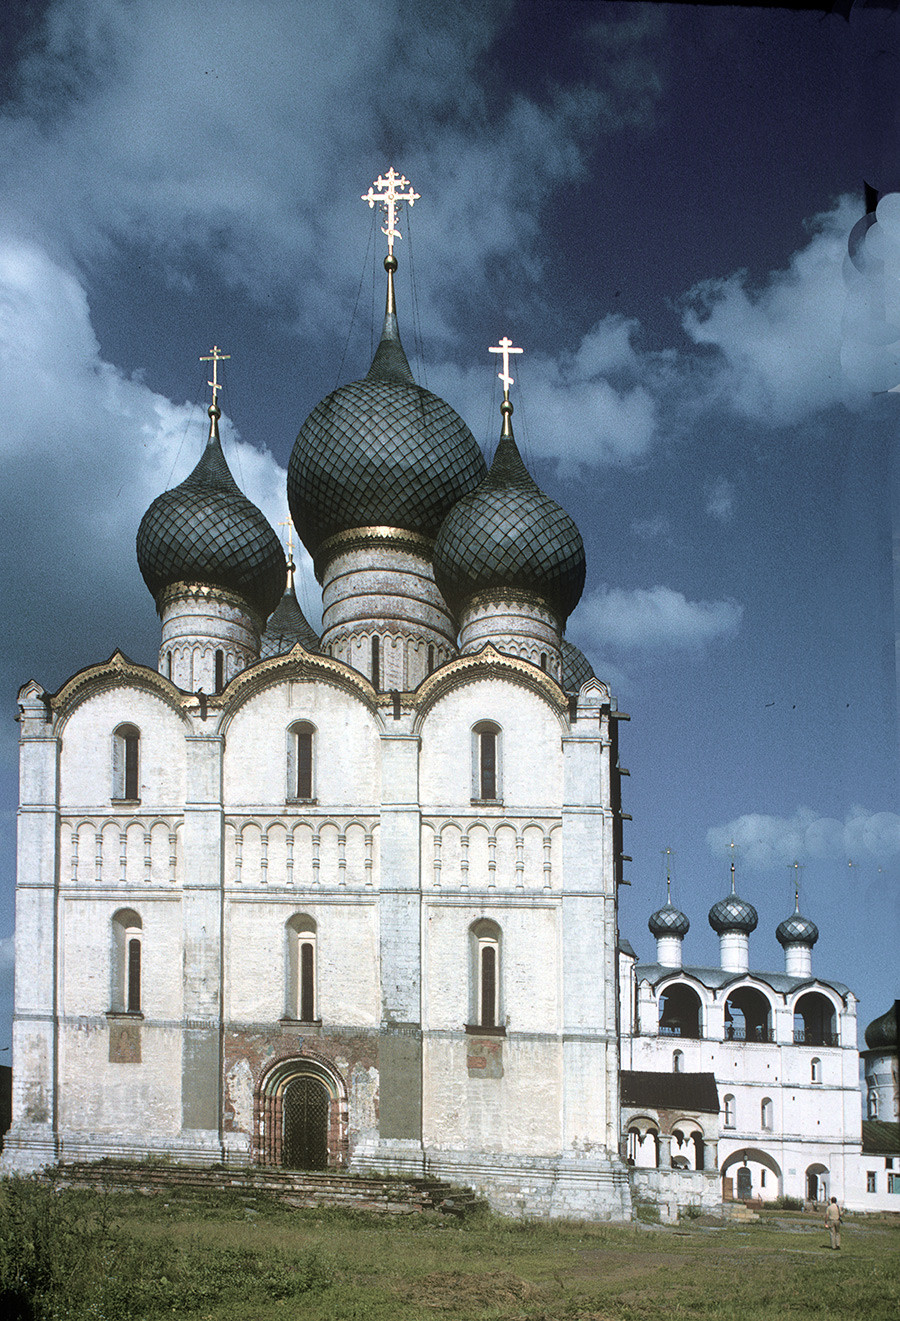 Dormition Cathedral&belfry. West view. June 28, 1995.